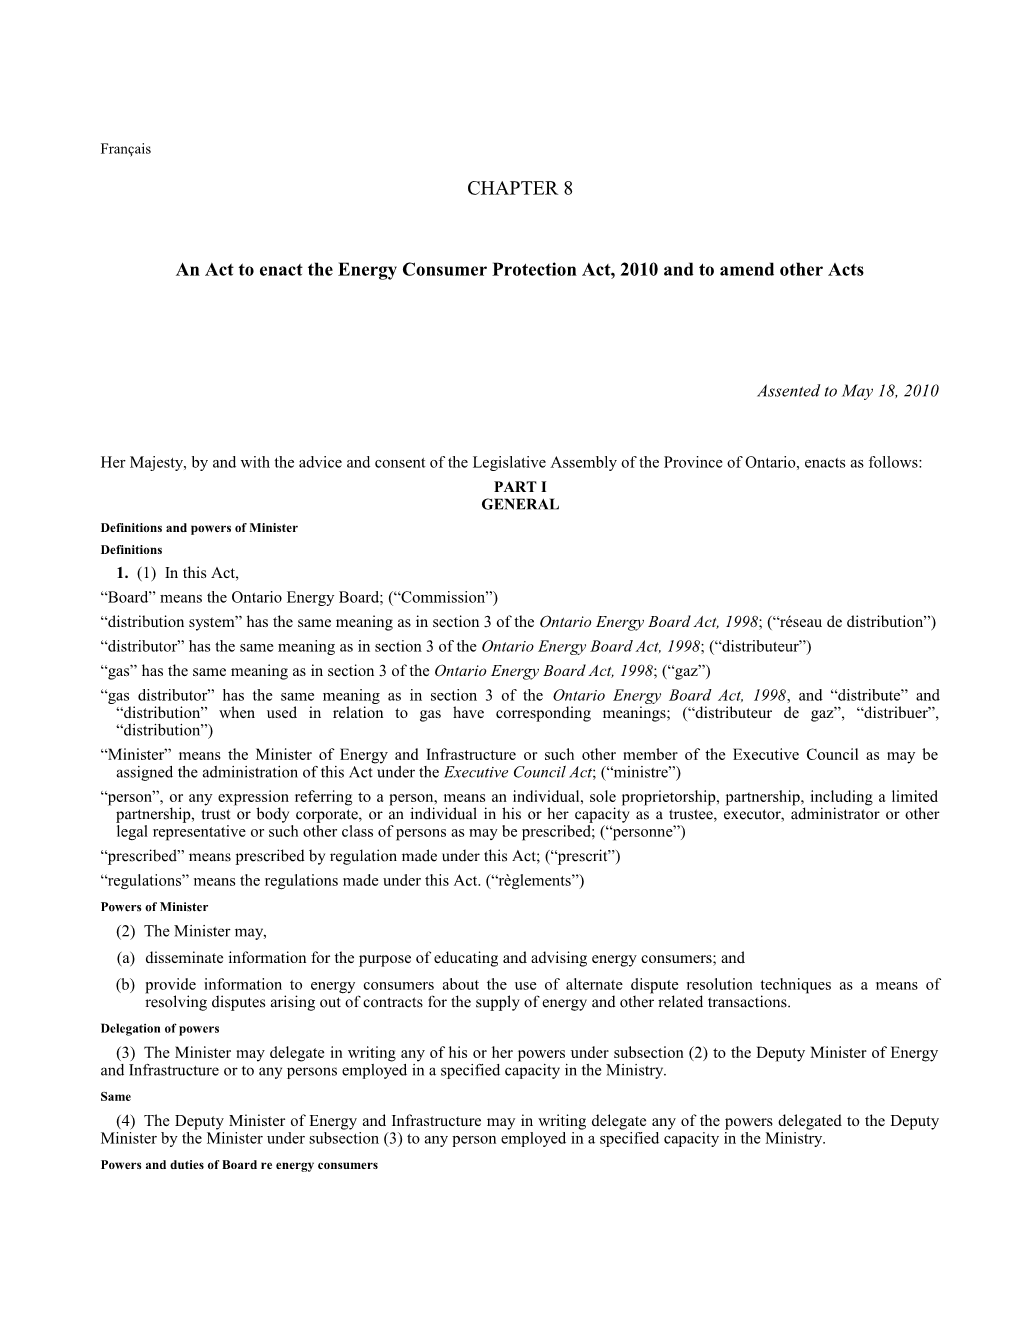 Energy Consumer Protection Act, 2010, S.O. 2010, C. 8 - Bill 235